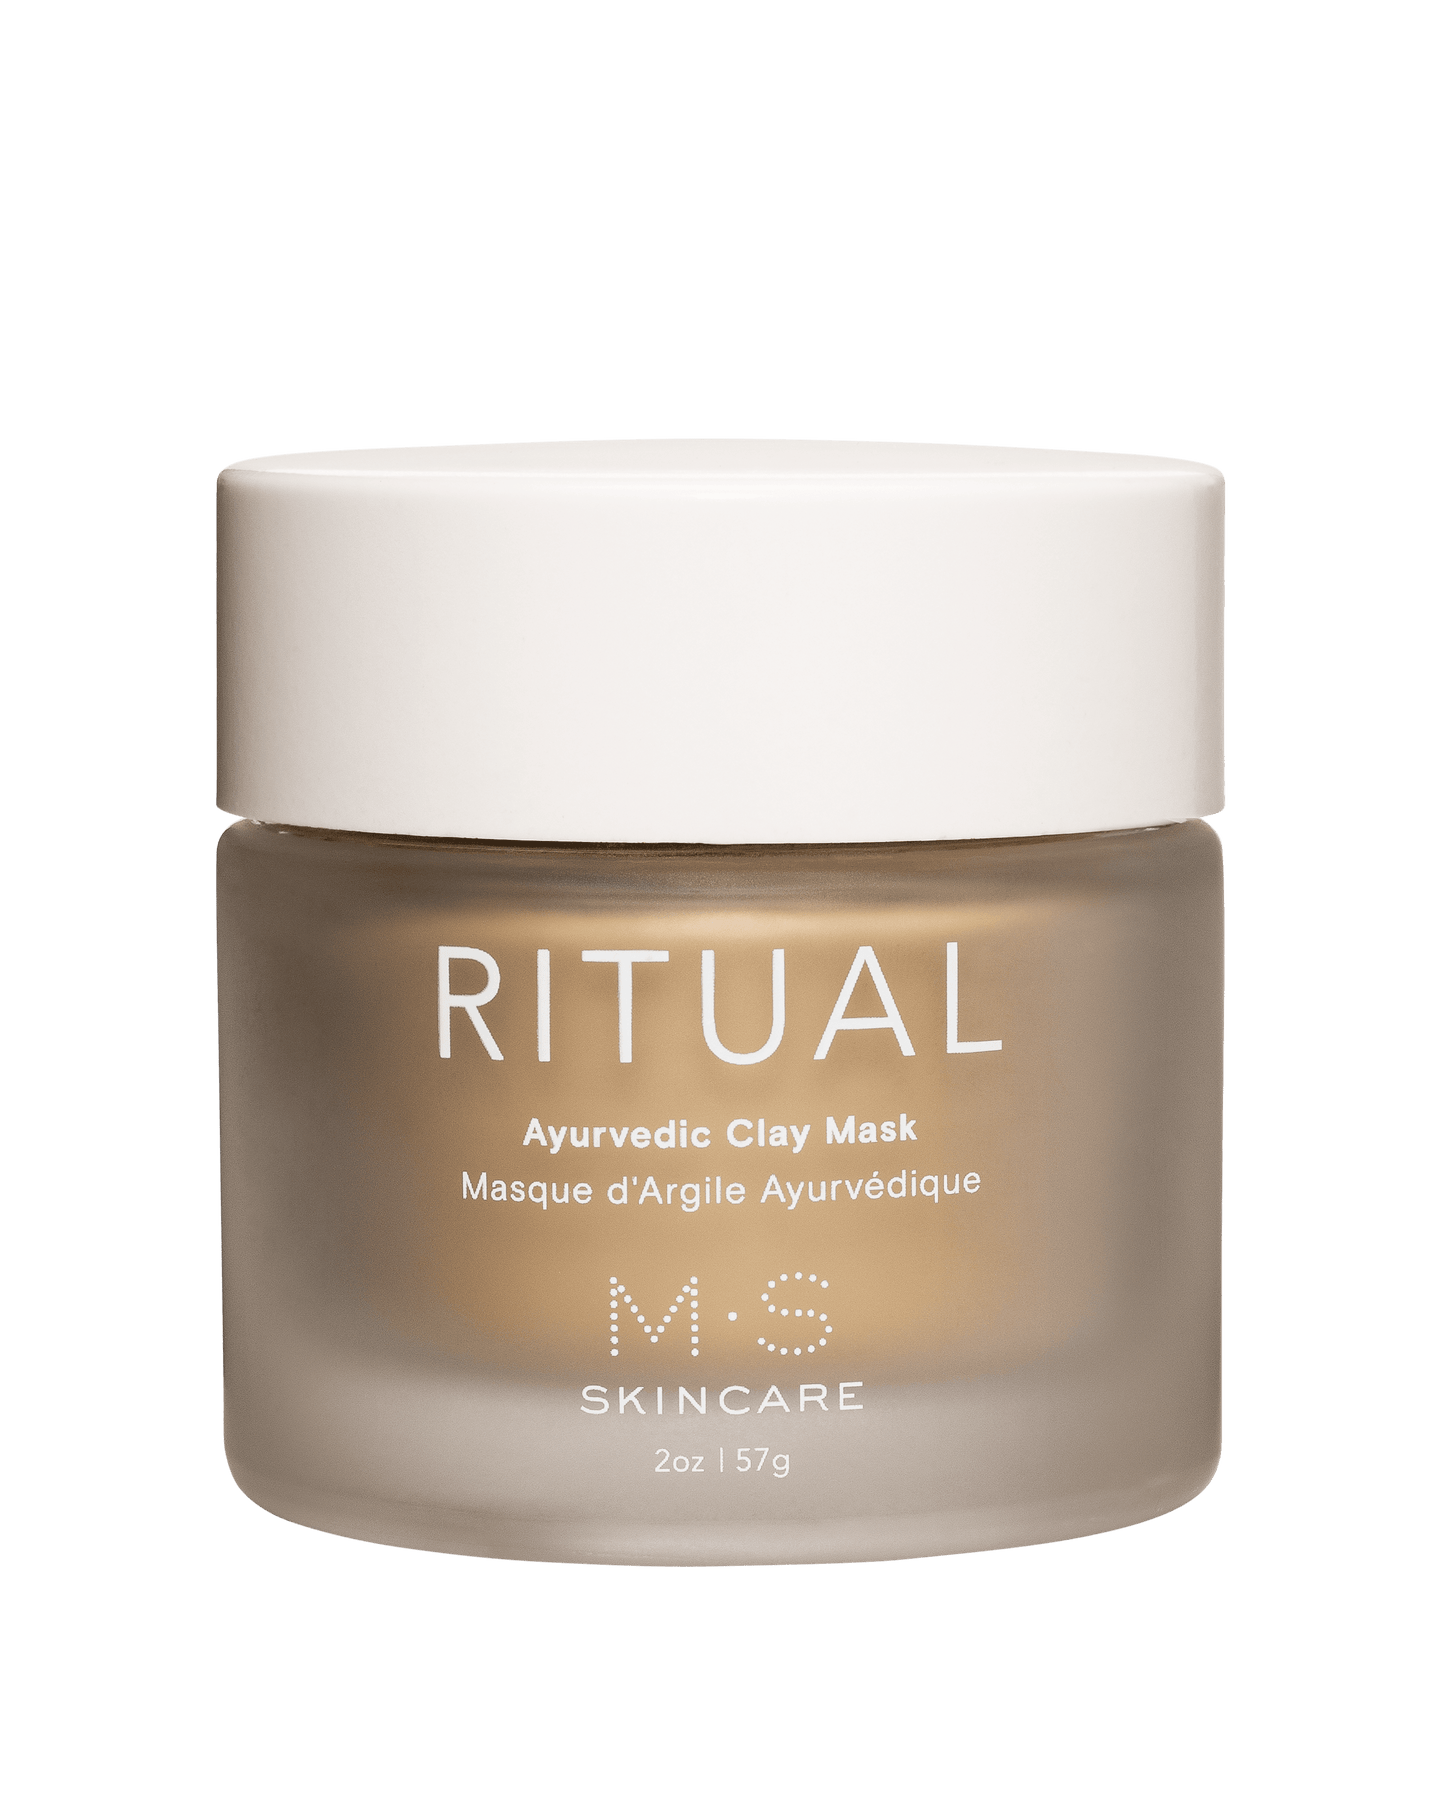 RITUAL | Ayurvedic Clay Mask by Mullein and Sparrow